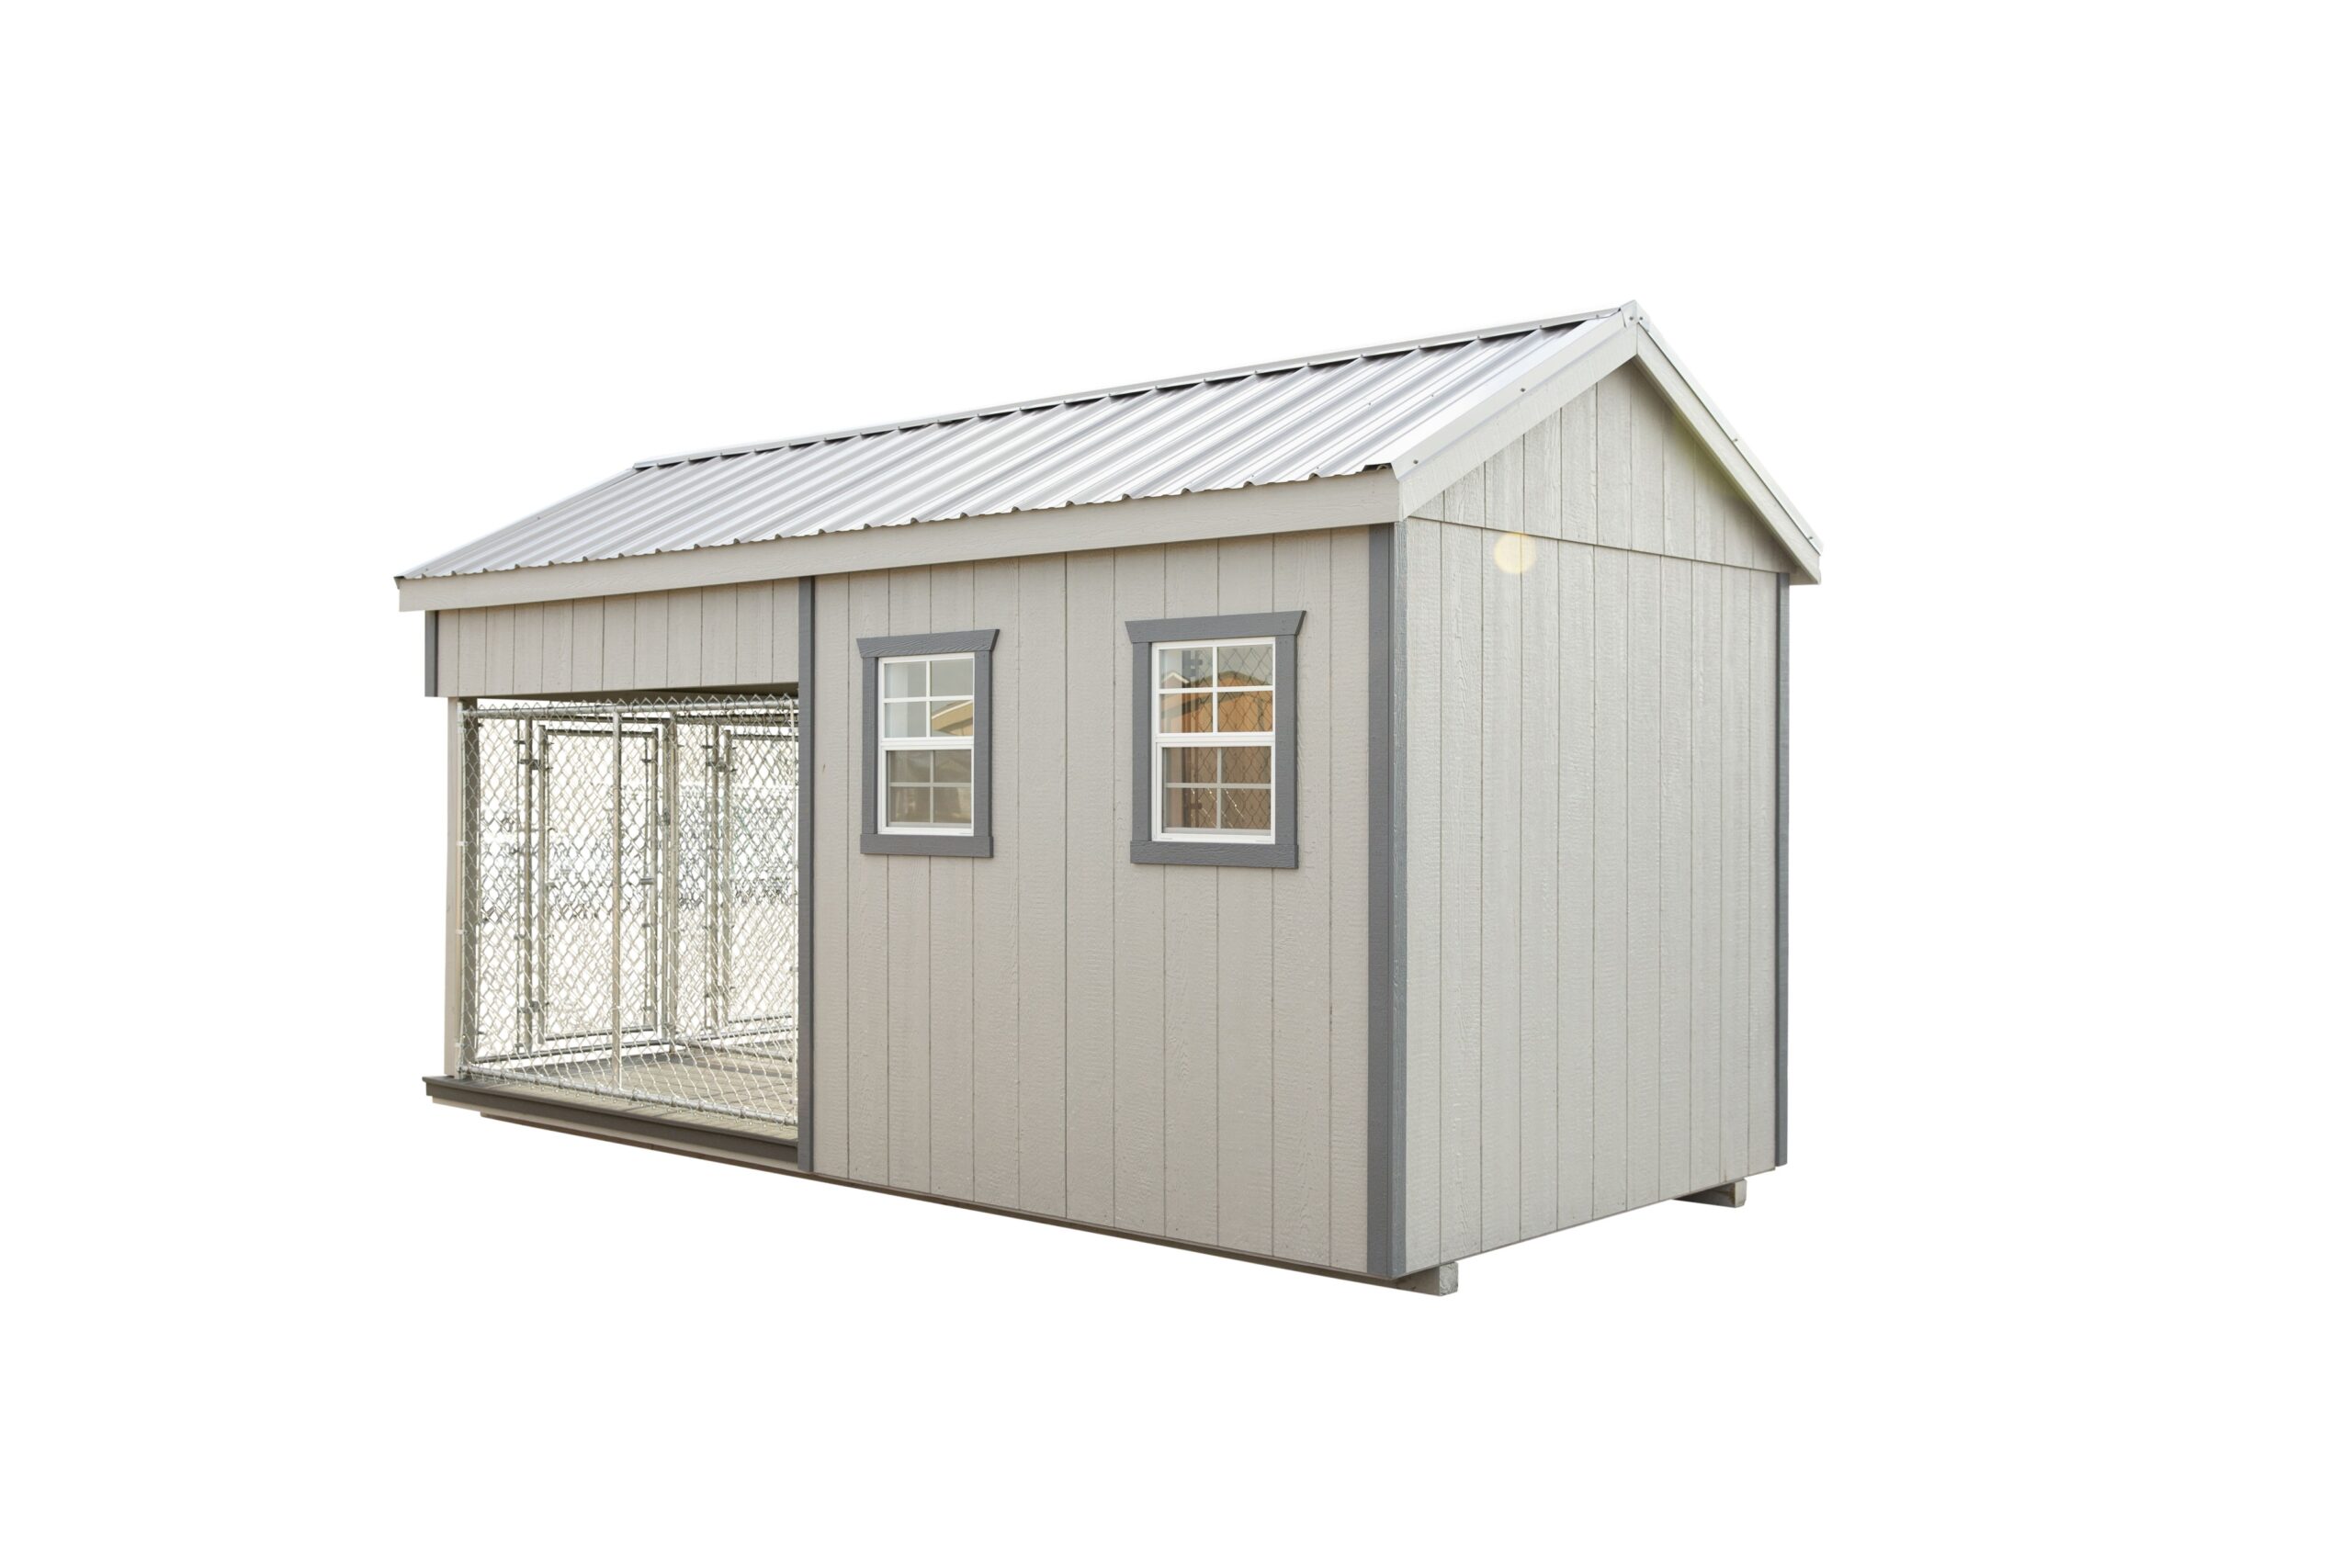 Side and back view of an 8x16 double capacity kennel with LP siding